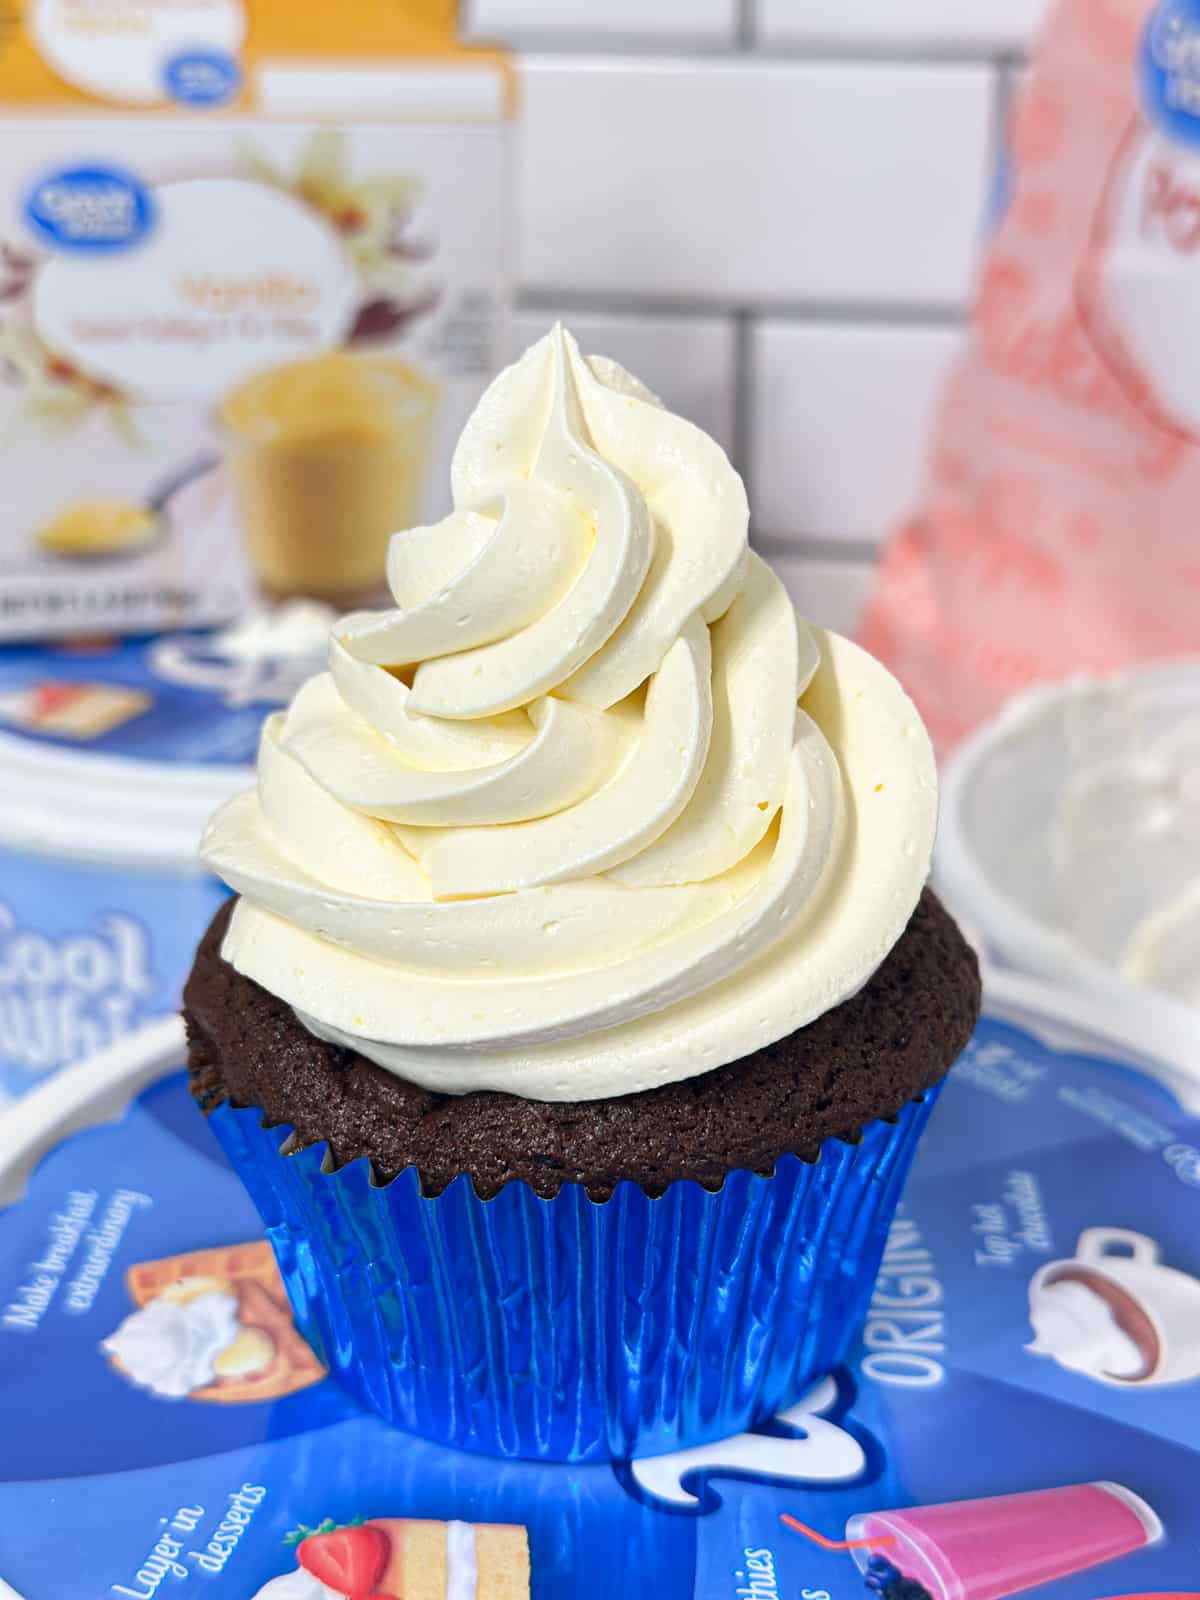 Cool Whip topping piped onto a chocolate cupcake.